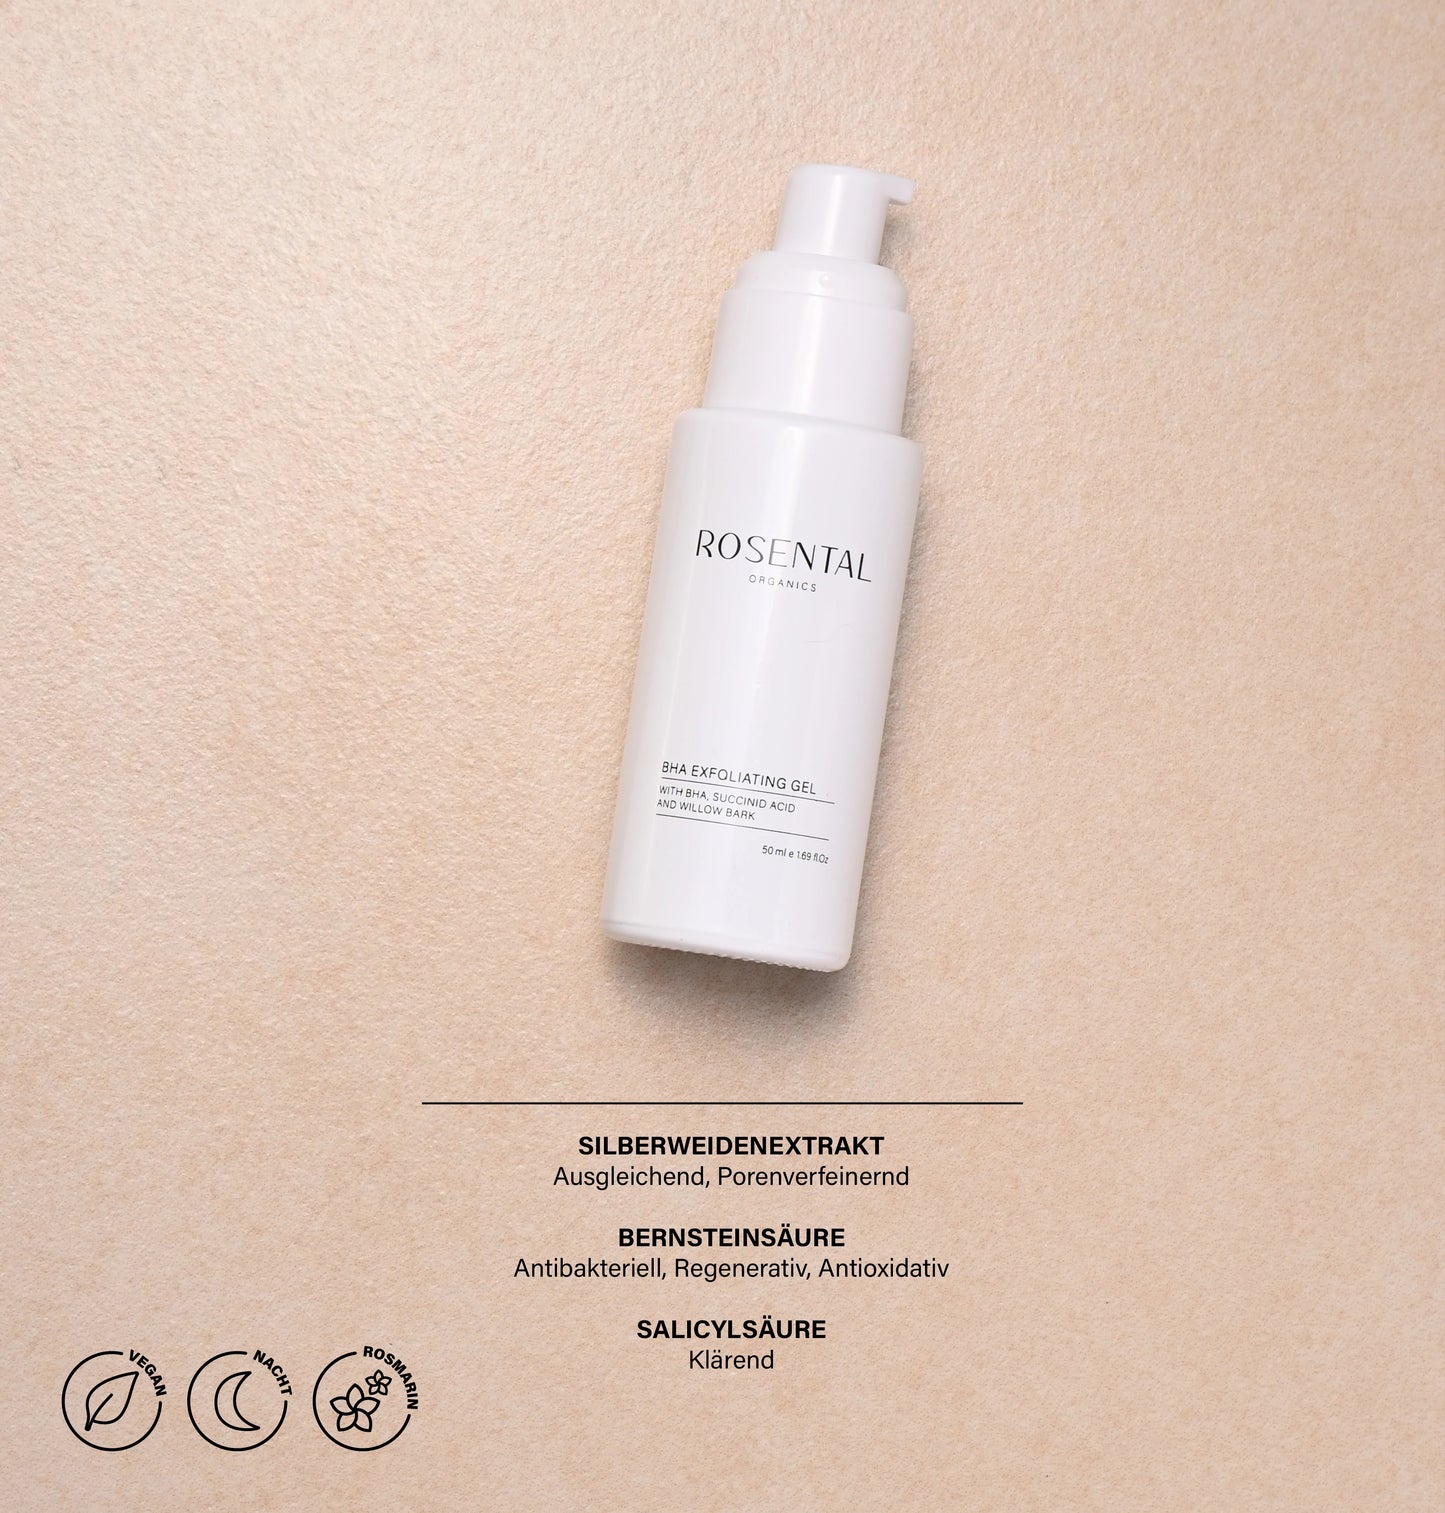 BHA Exfoliating Gel | with Succinid Acid and Willow Bark